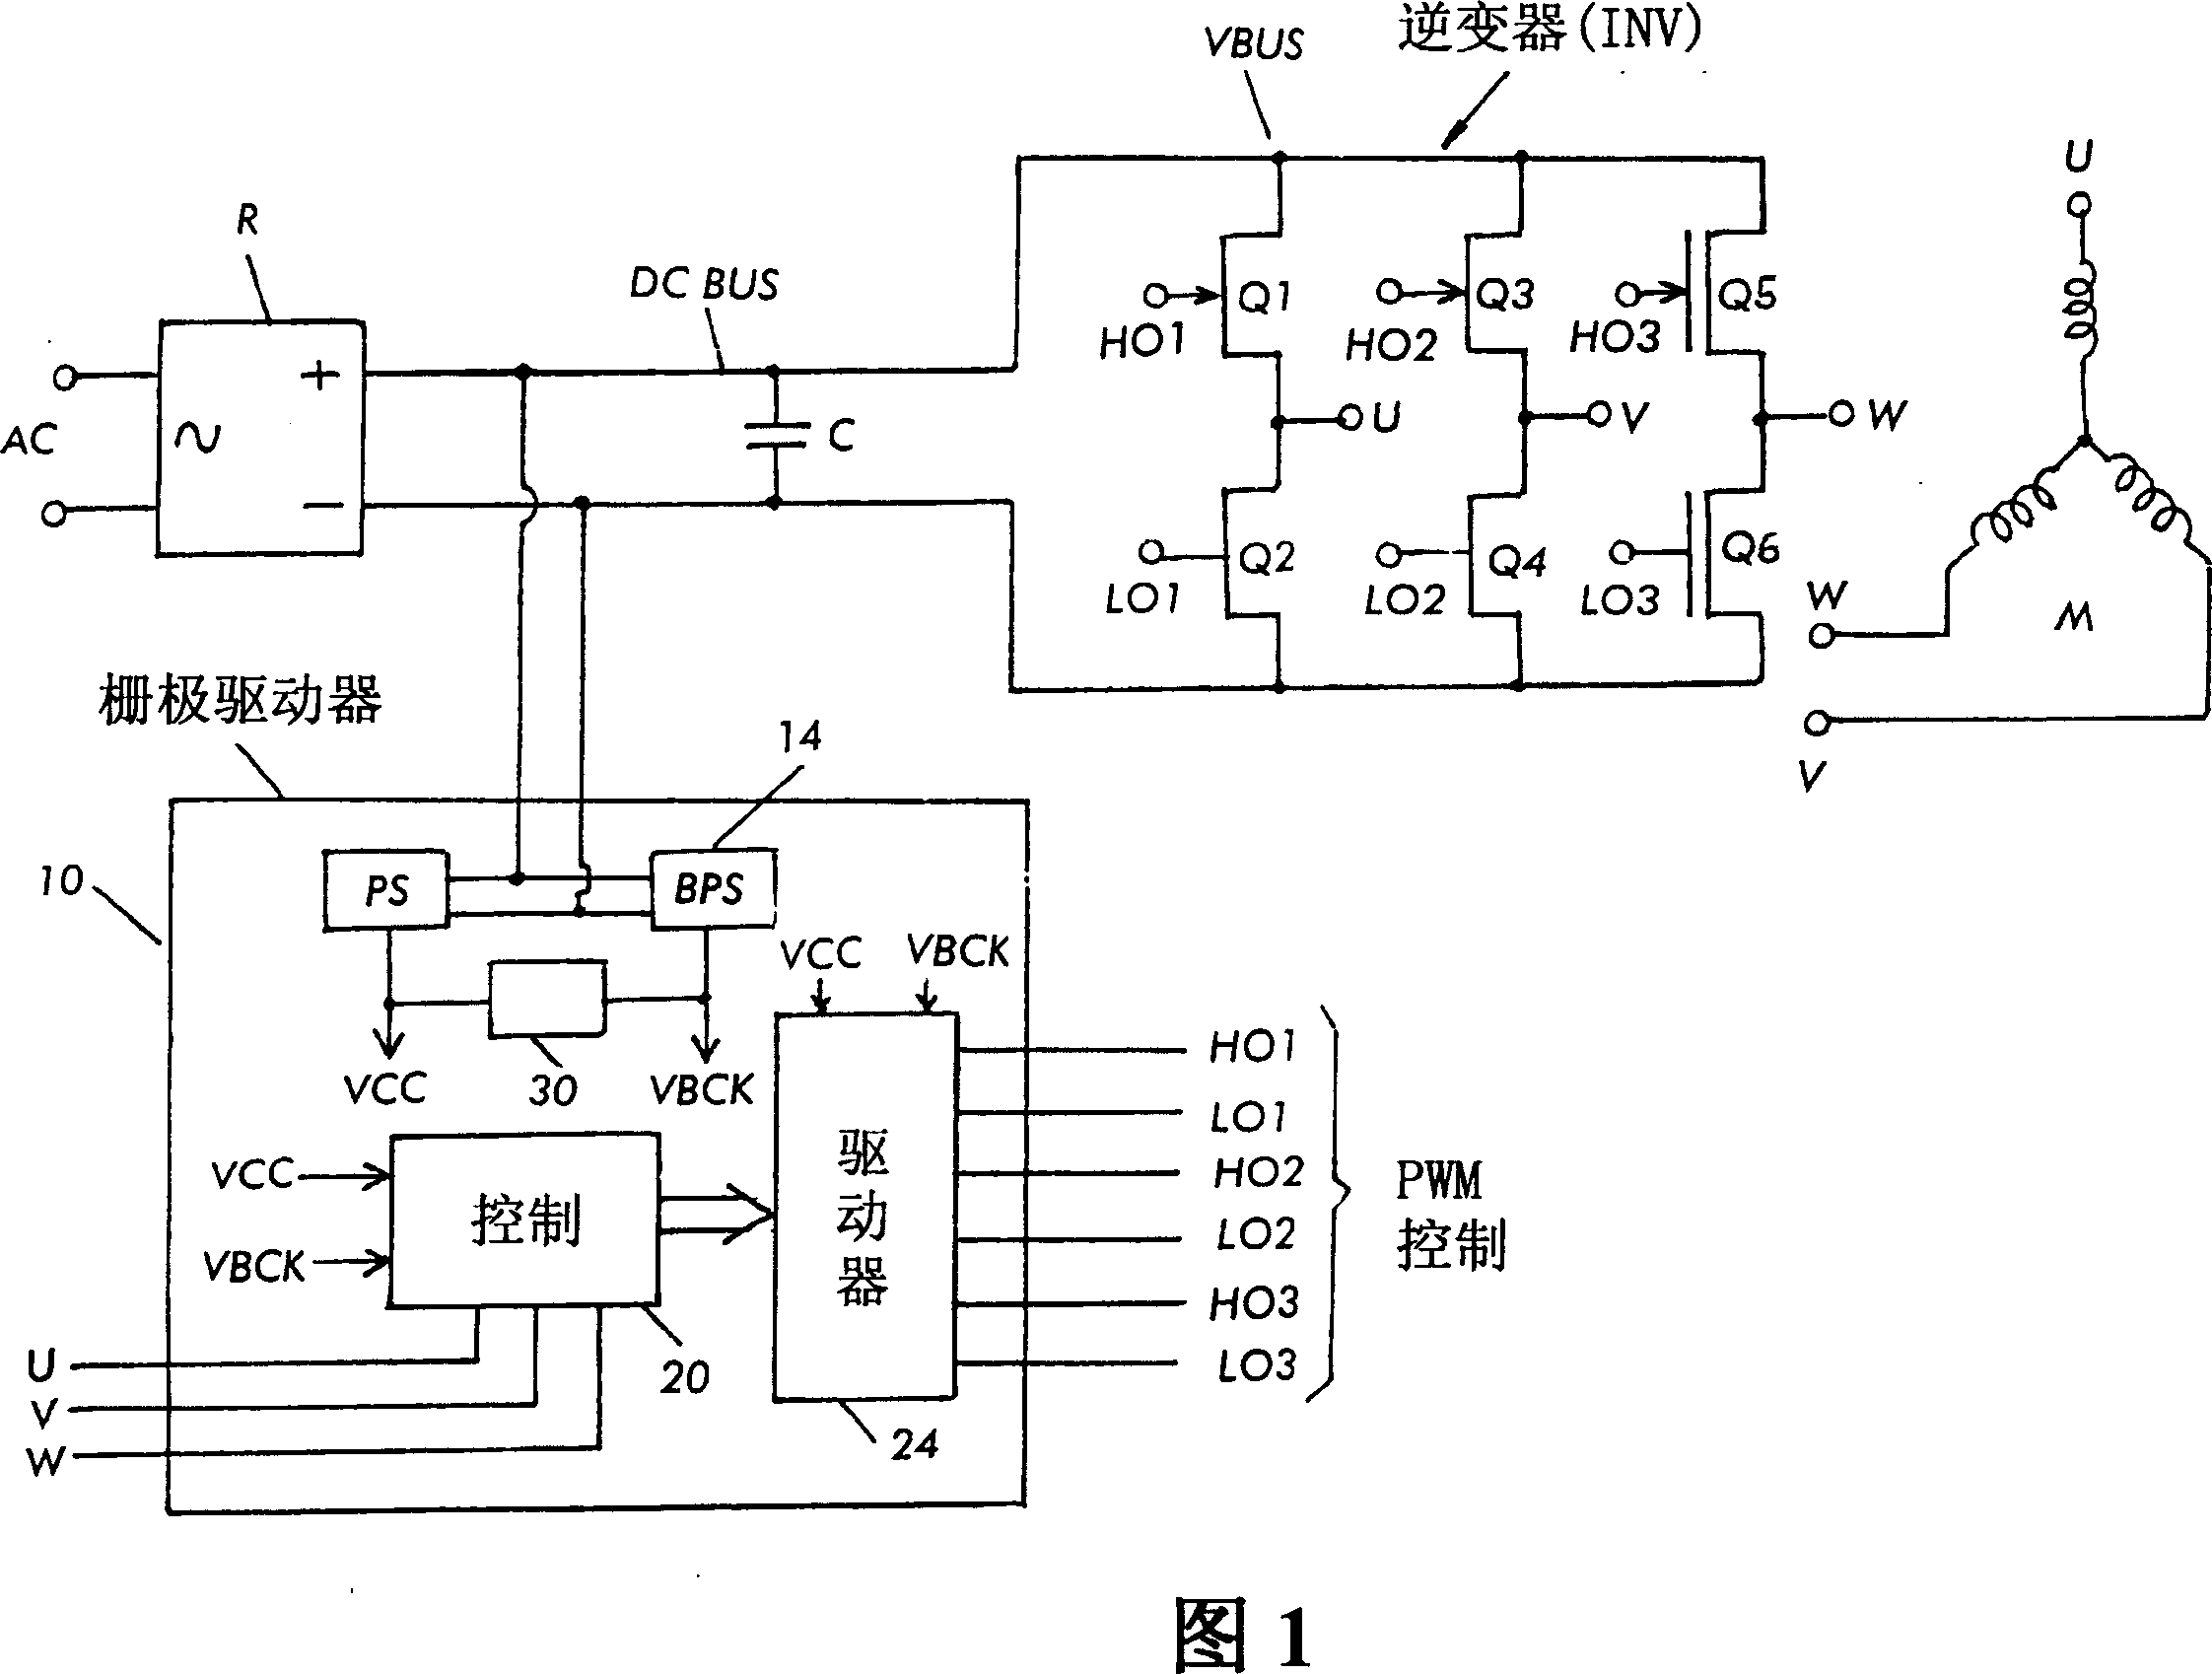 Safety circuit for permanent magnet synchronous generator actuated by weak field